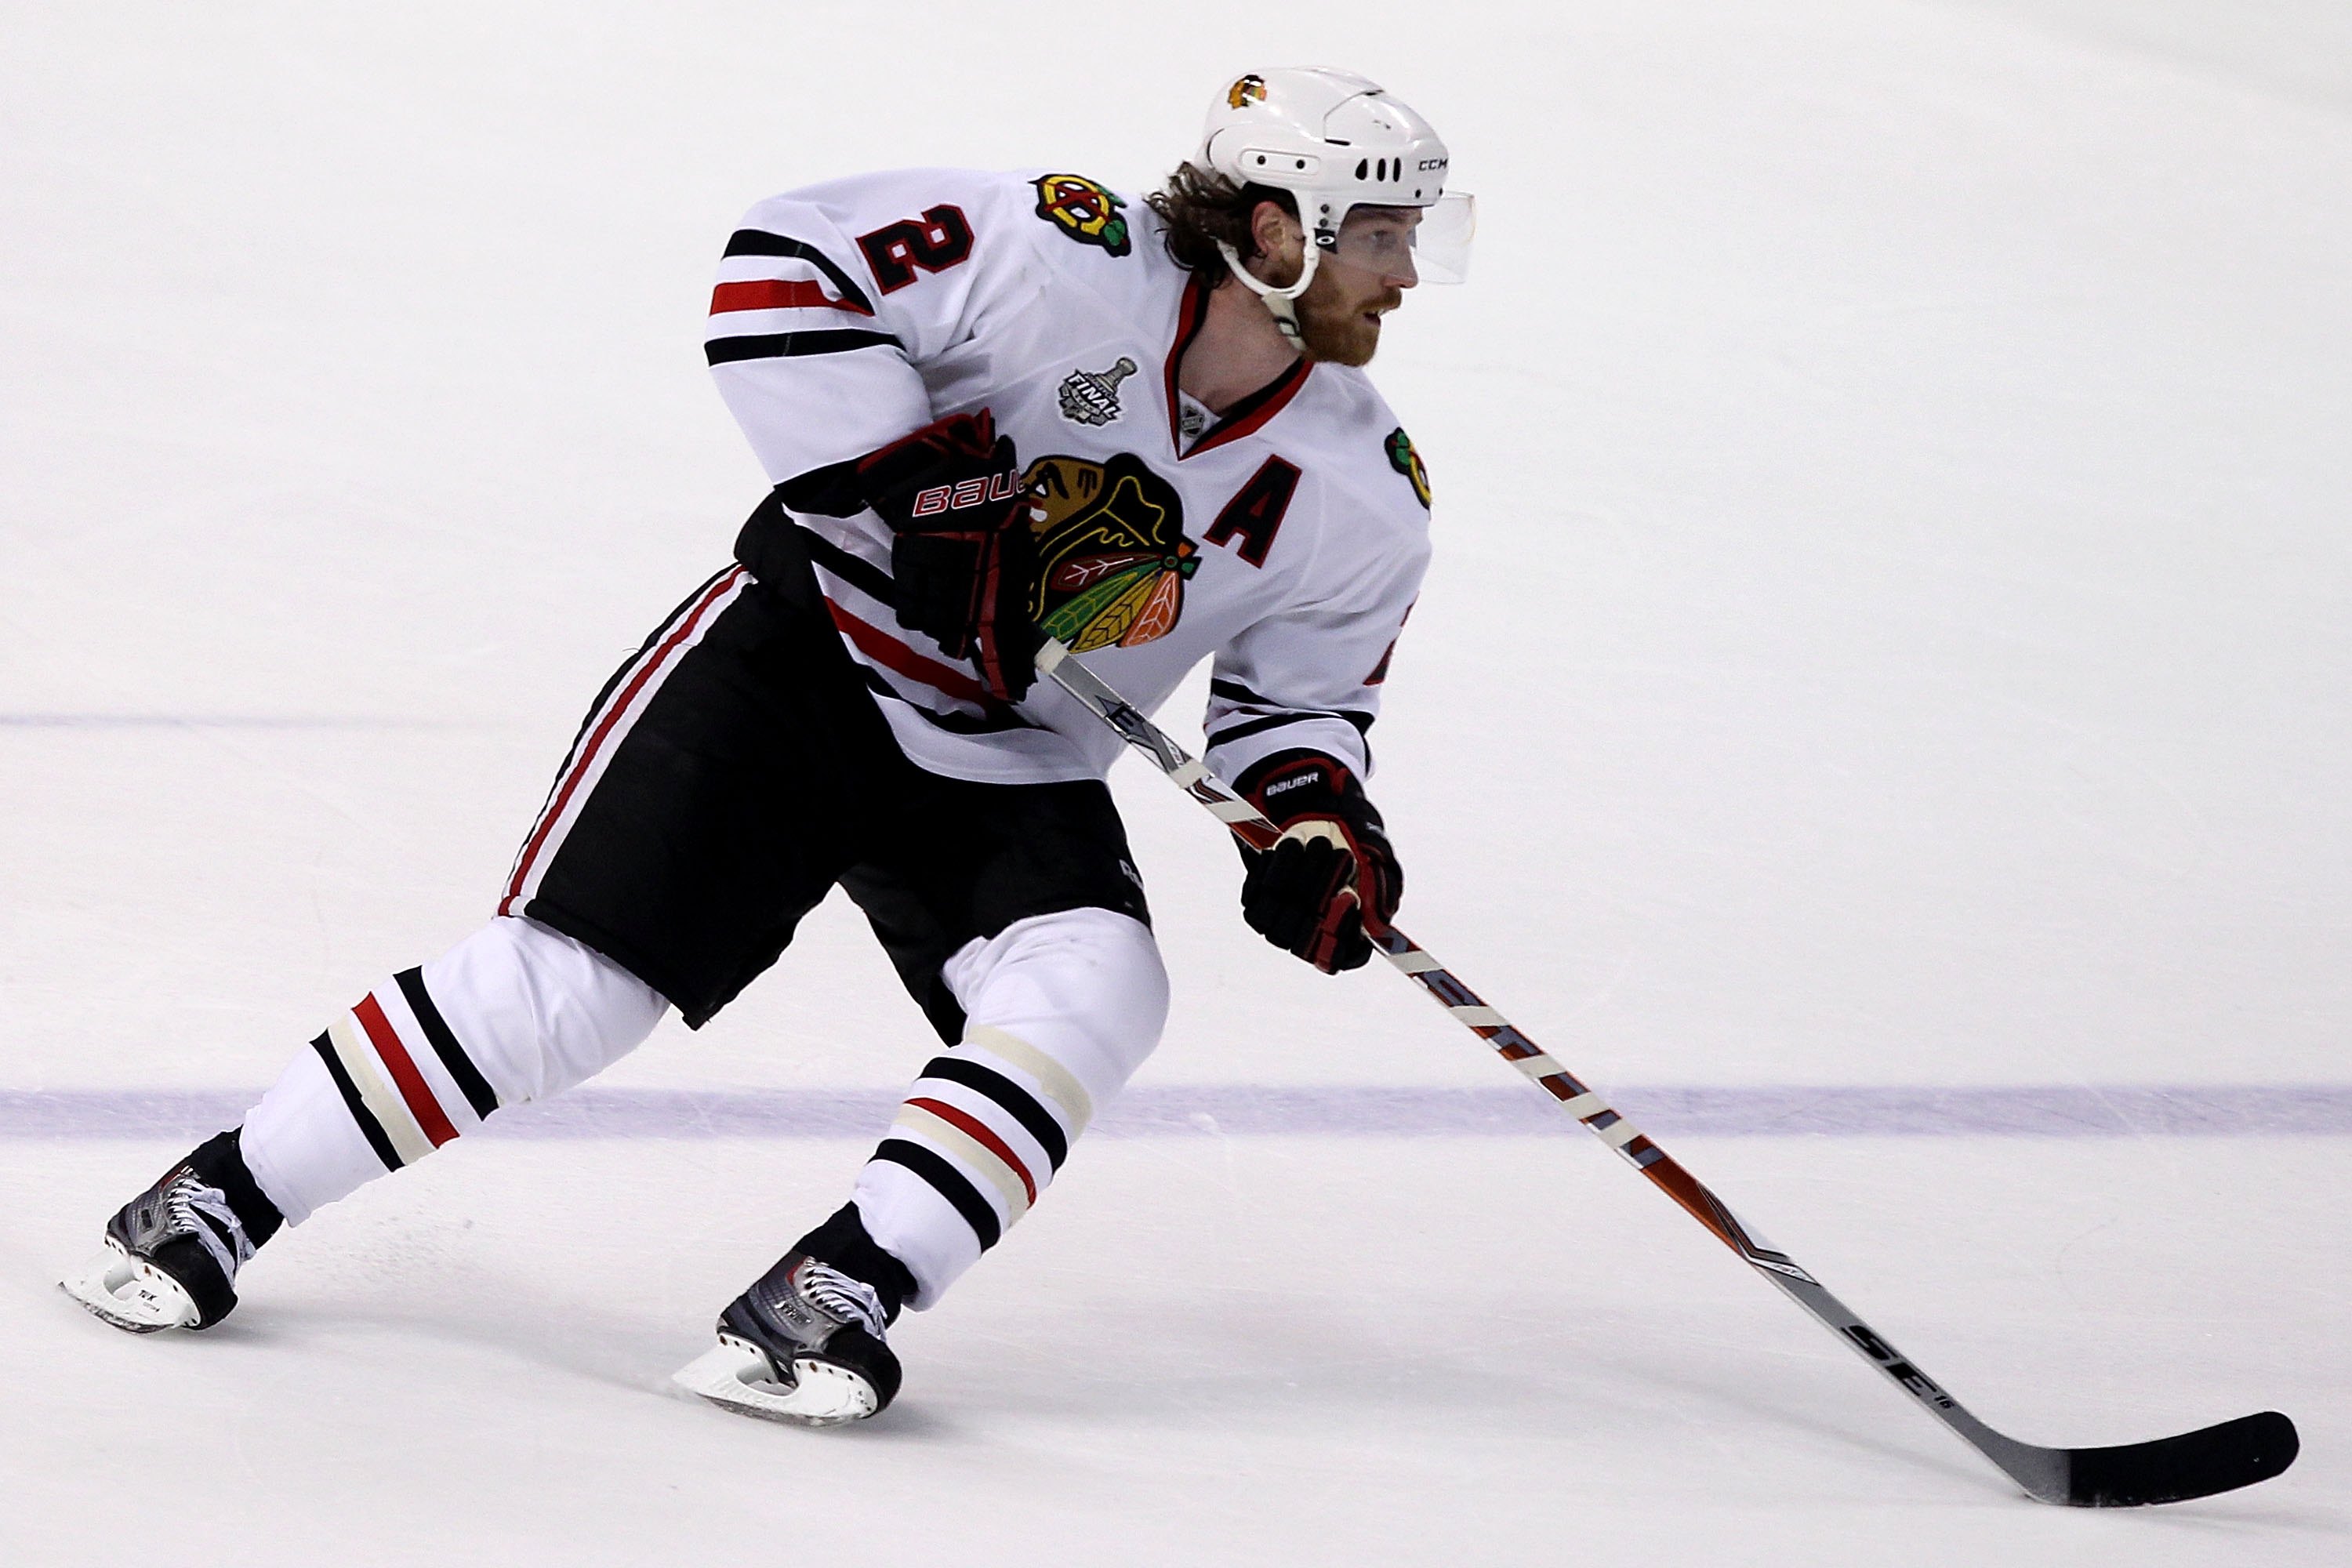 PHILADELPHIA - JUNE 04:  Duncan Keith #2 of the Chicago Blackhawks skates in Game Four of the 2010 NHL Stanley Cup Final against the Philadelphia Flyers at Wachovia Center on June 4, 2010 in Philadelphia, Pennsylvania.  (Photo by Andre Ringuette/Getty Ima